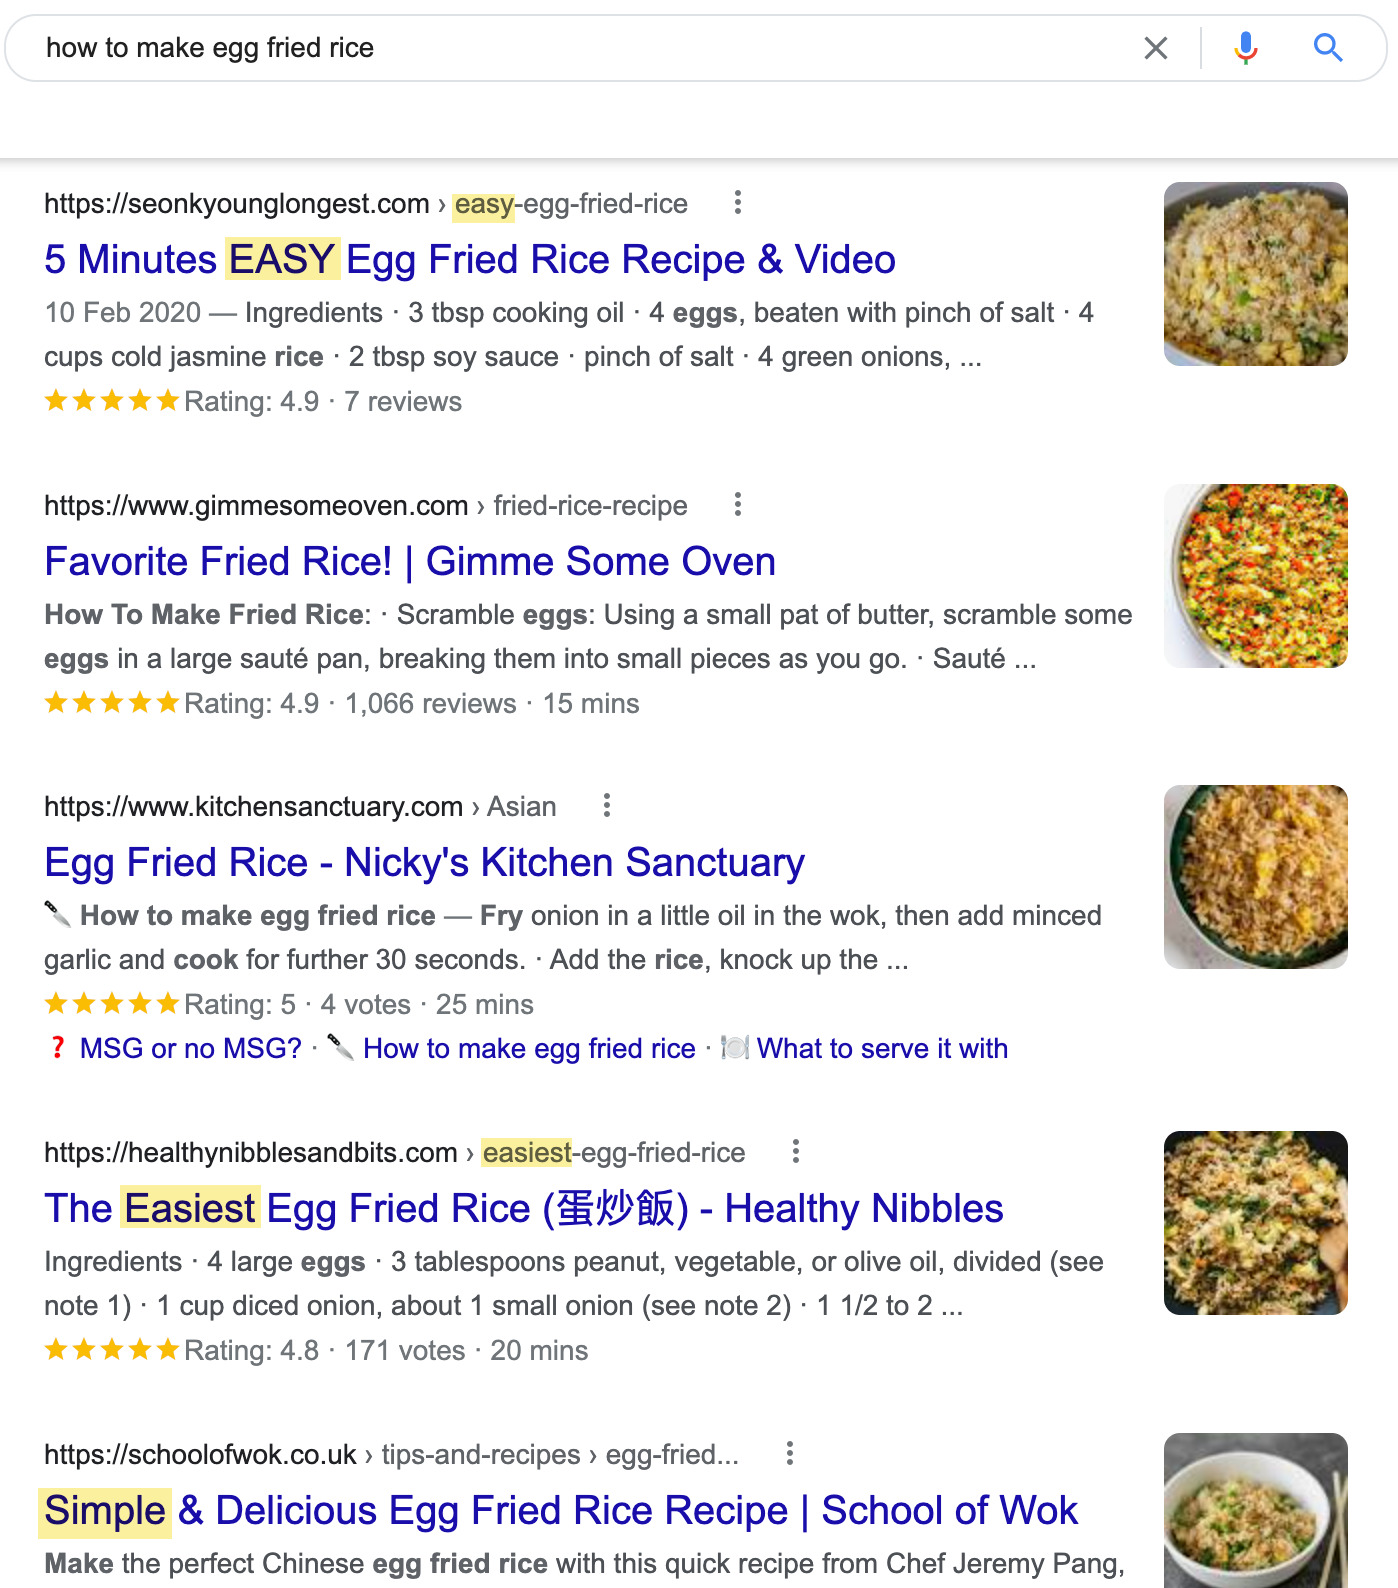 SERP for "how to make egg fried rice"